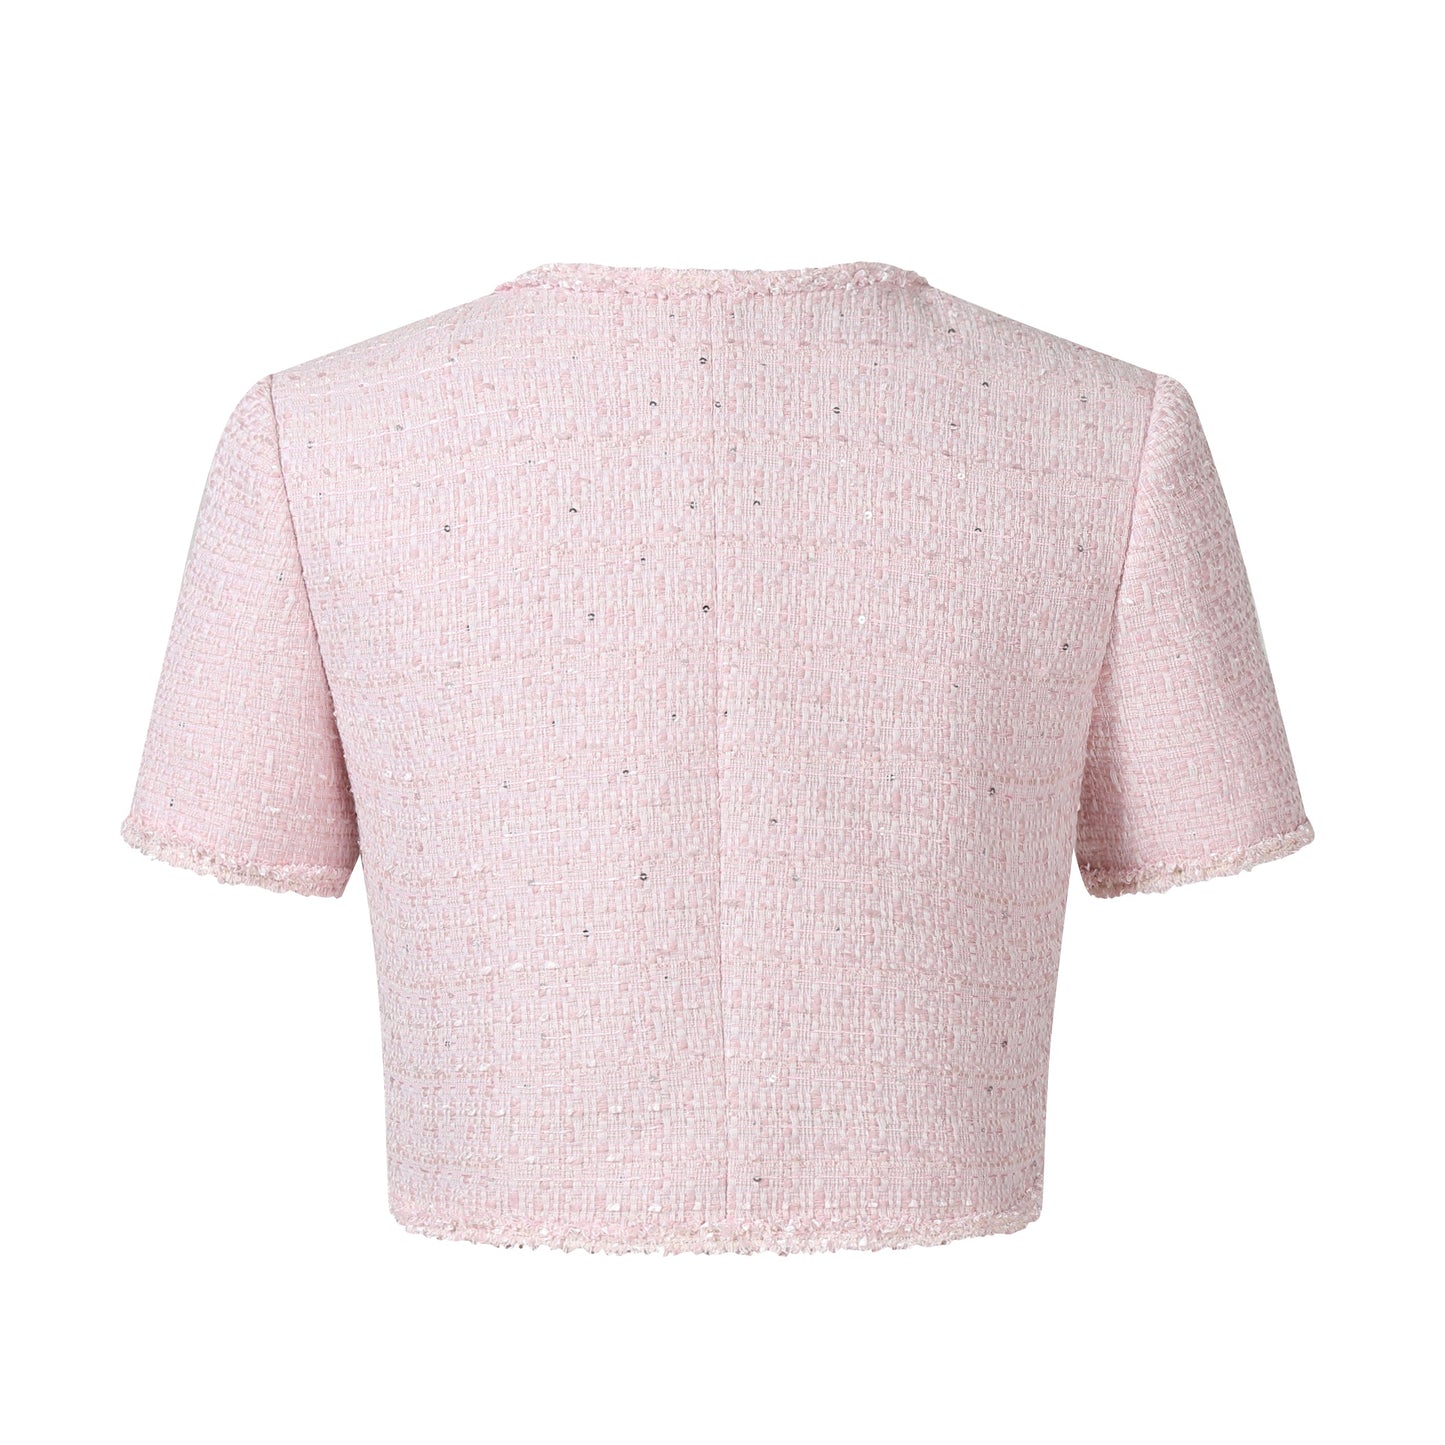 THREE QUARTERS Wool Sequins Short-sleeved Jacket and Skirt